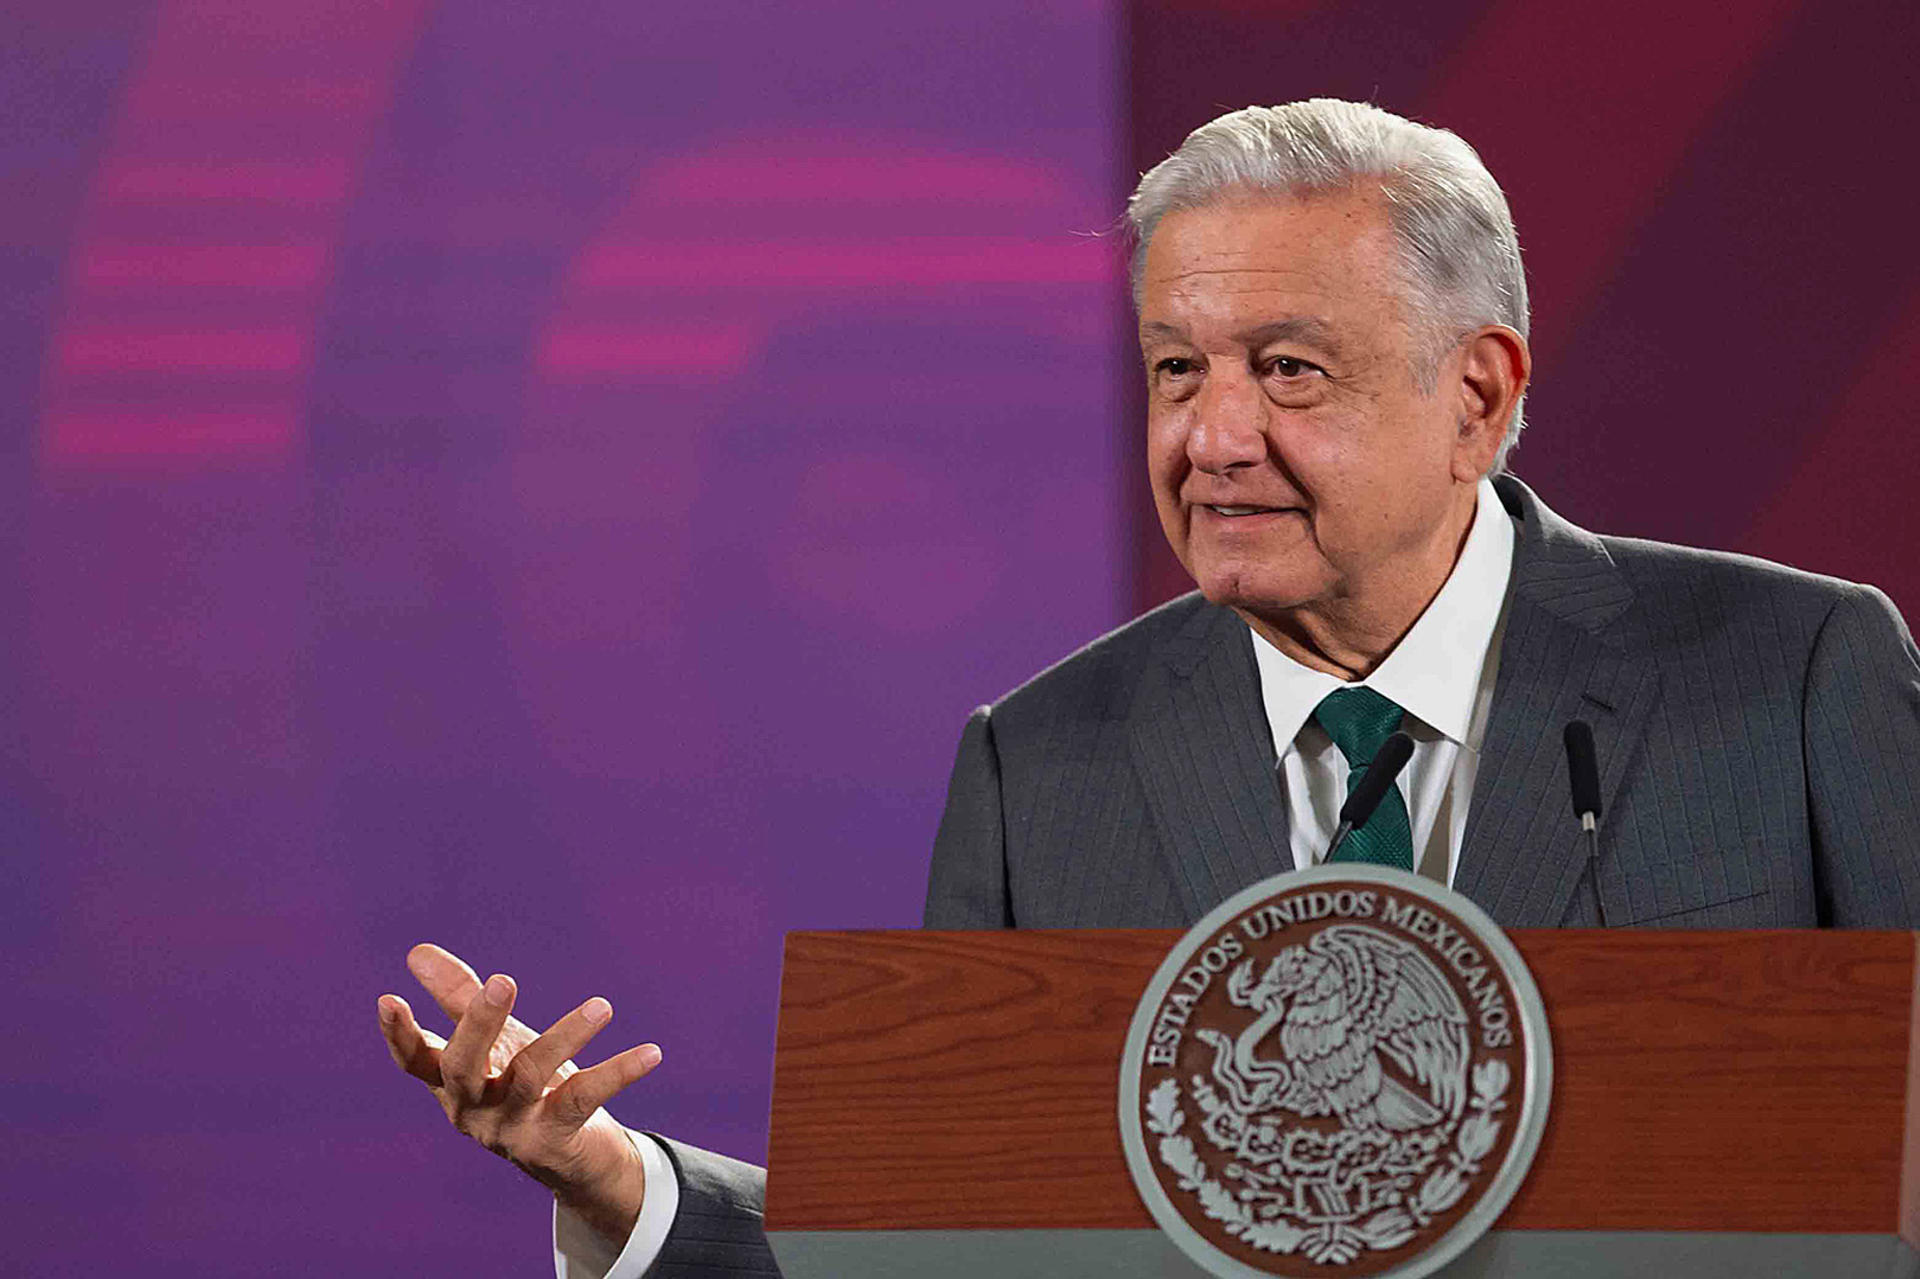 MEX6365. MEXICO CITY (MEXICO), 09/25/2023.- Photo provided today by the Presidency of Mexico showing President Andres Manuel Lopez Obrador during his morning press conference at the National Palace in Mexico City, Mexico. EFE/Presidency of Mexico /EDITORIAL USE ONLY /ONLY AVAILABLE TO ILLUSTRATE THE NEWS IT ACCOMPANIES (MANDATORY CREDIT)